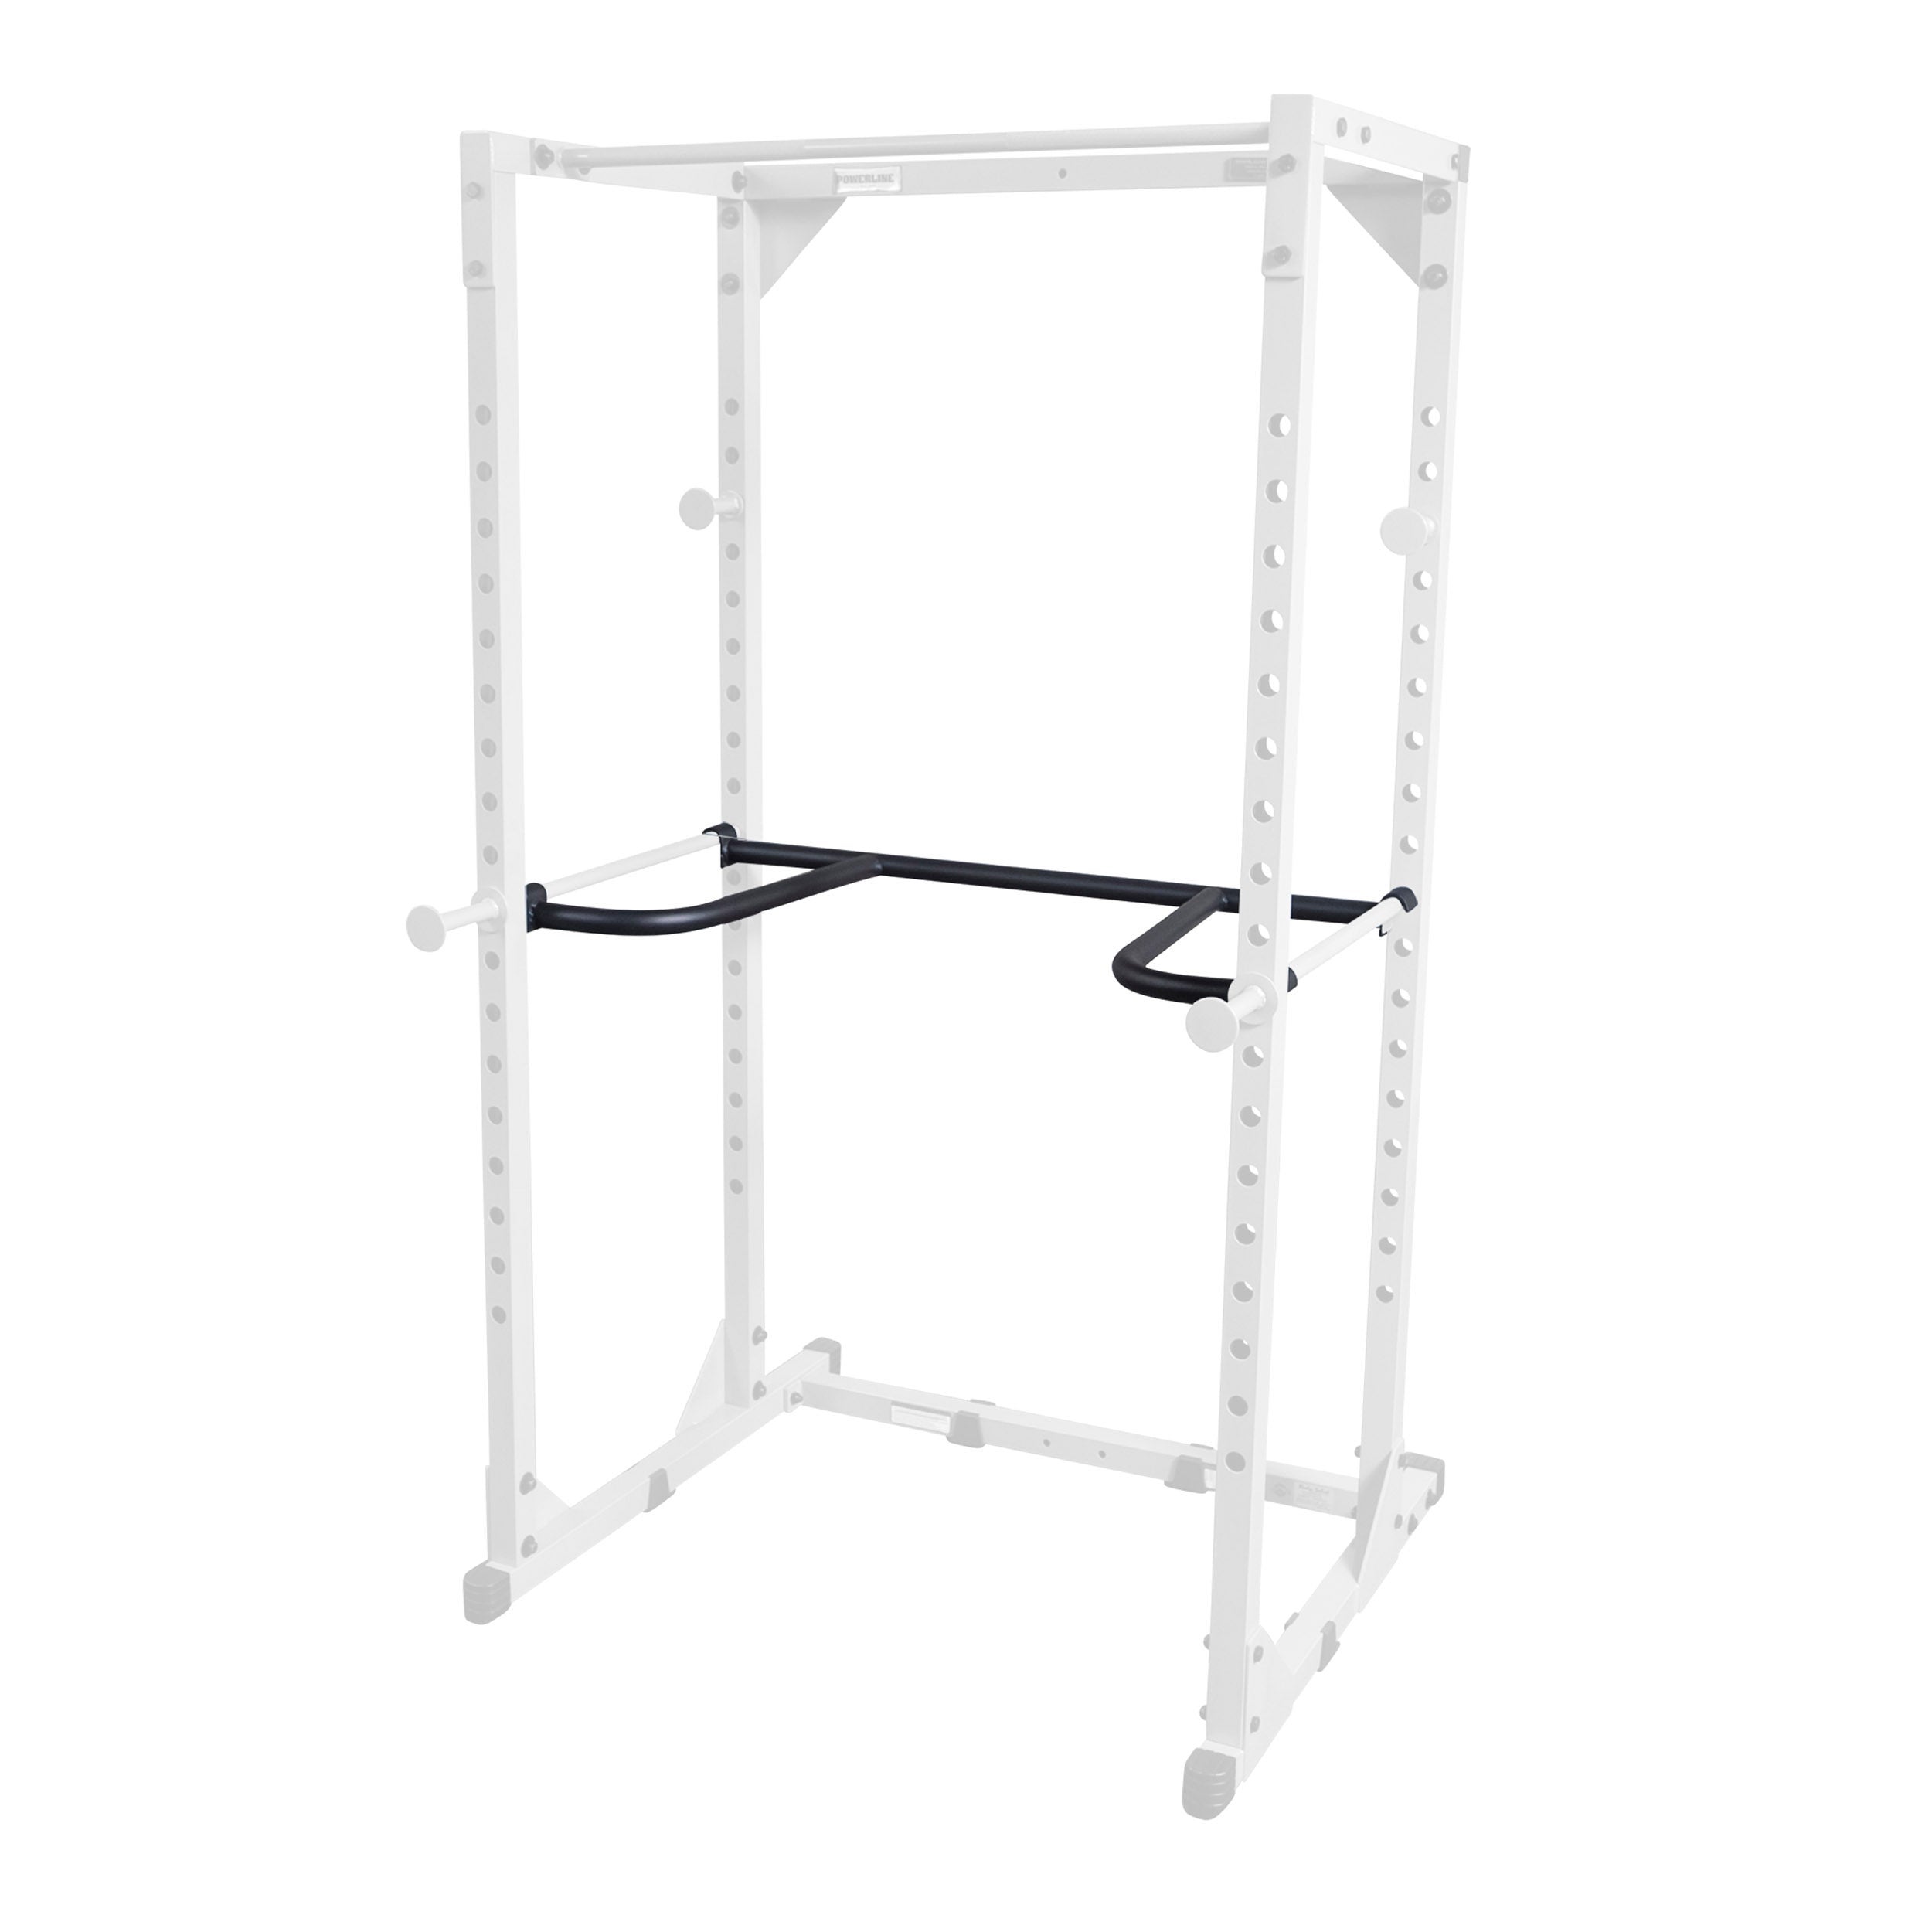 Dip Attachment for Power Racks BFPR100R and PPR200X (Dip Only, Rack Not Included)